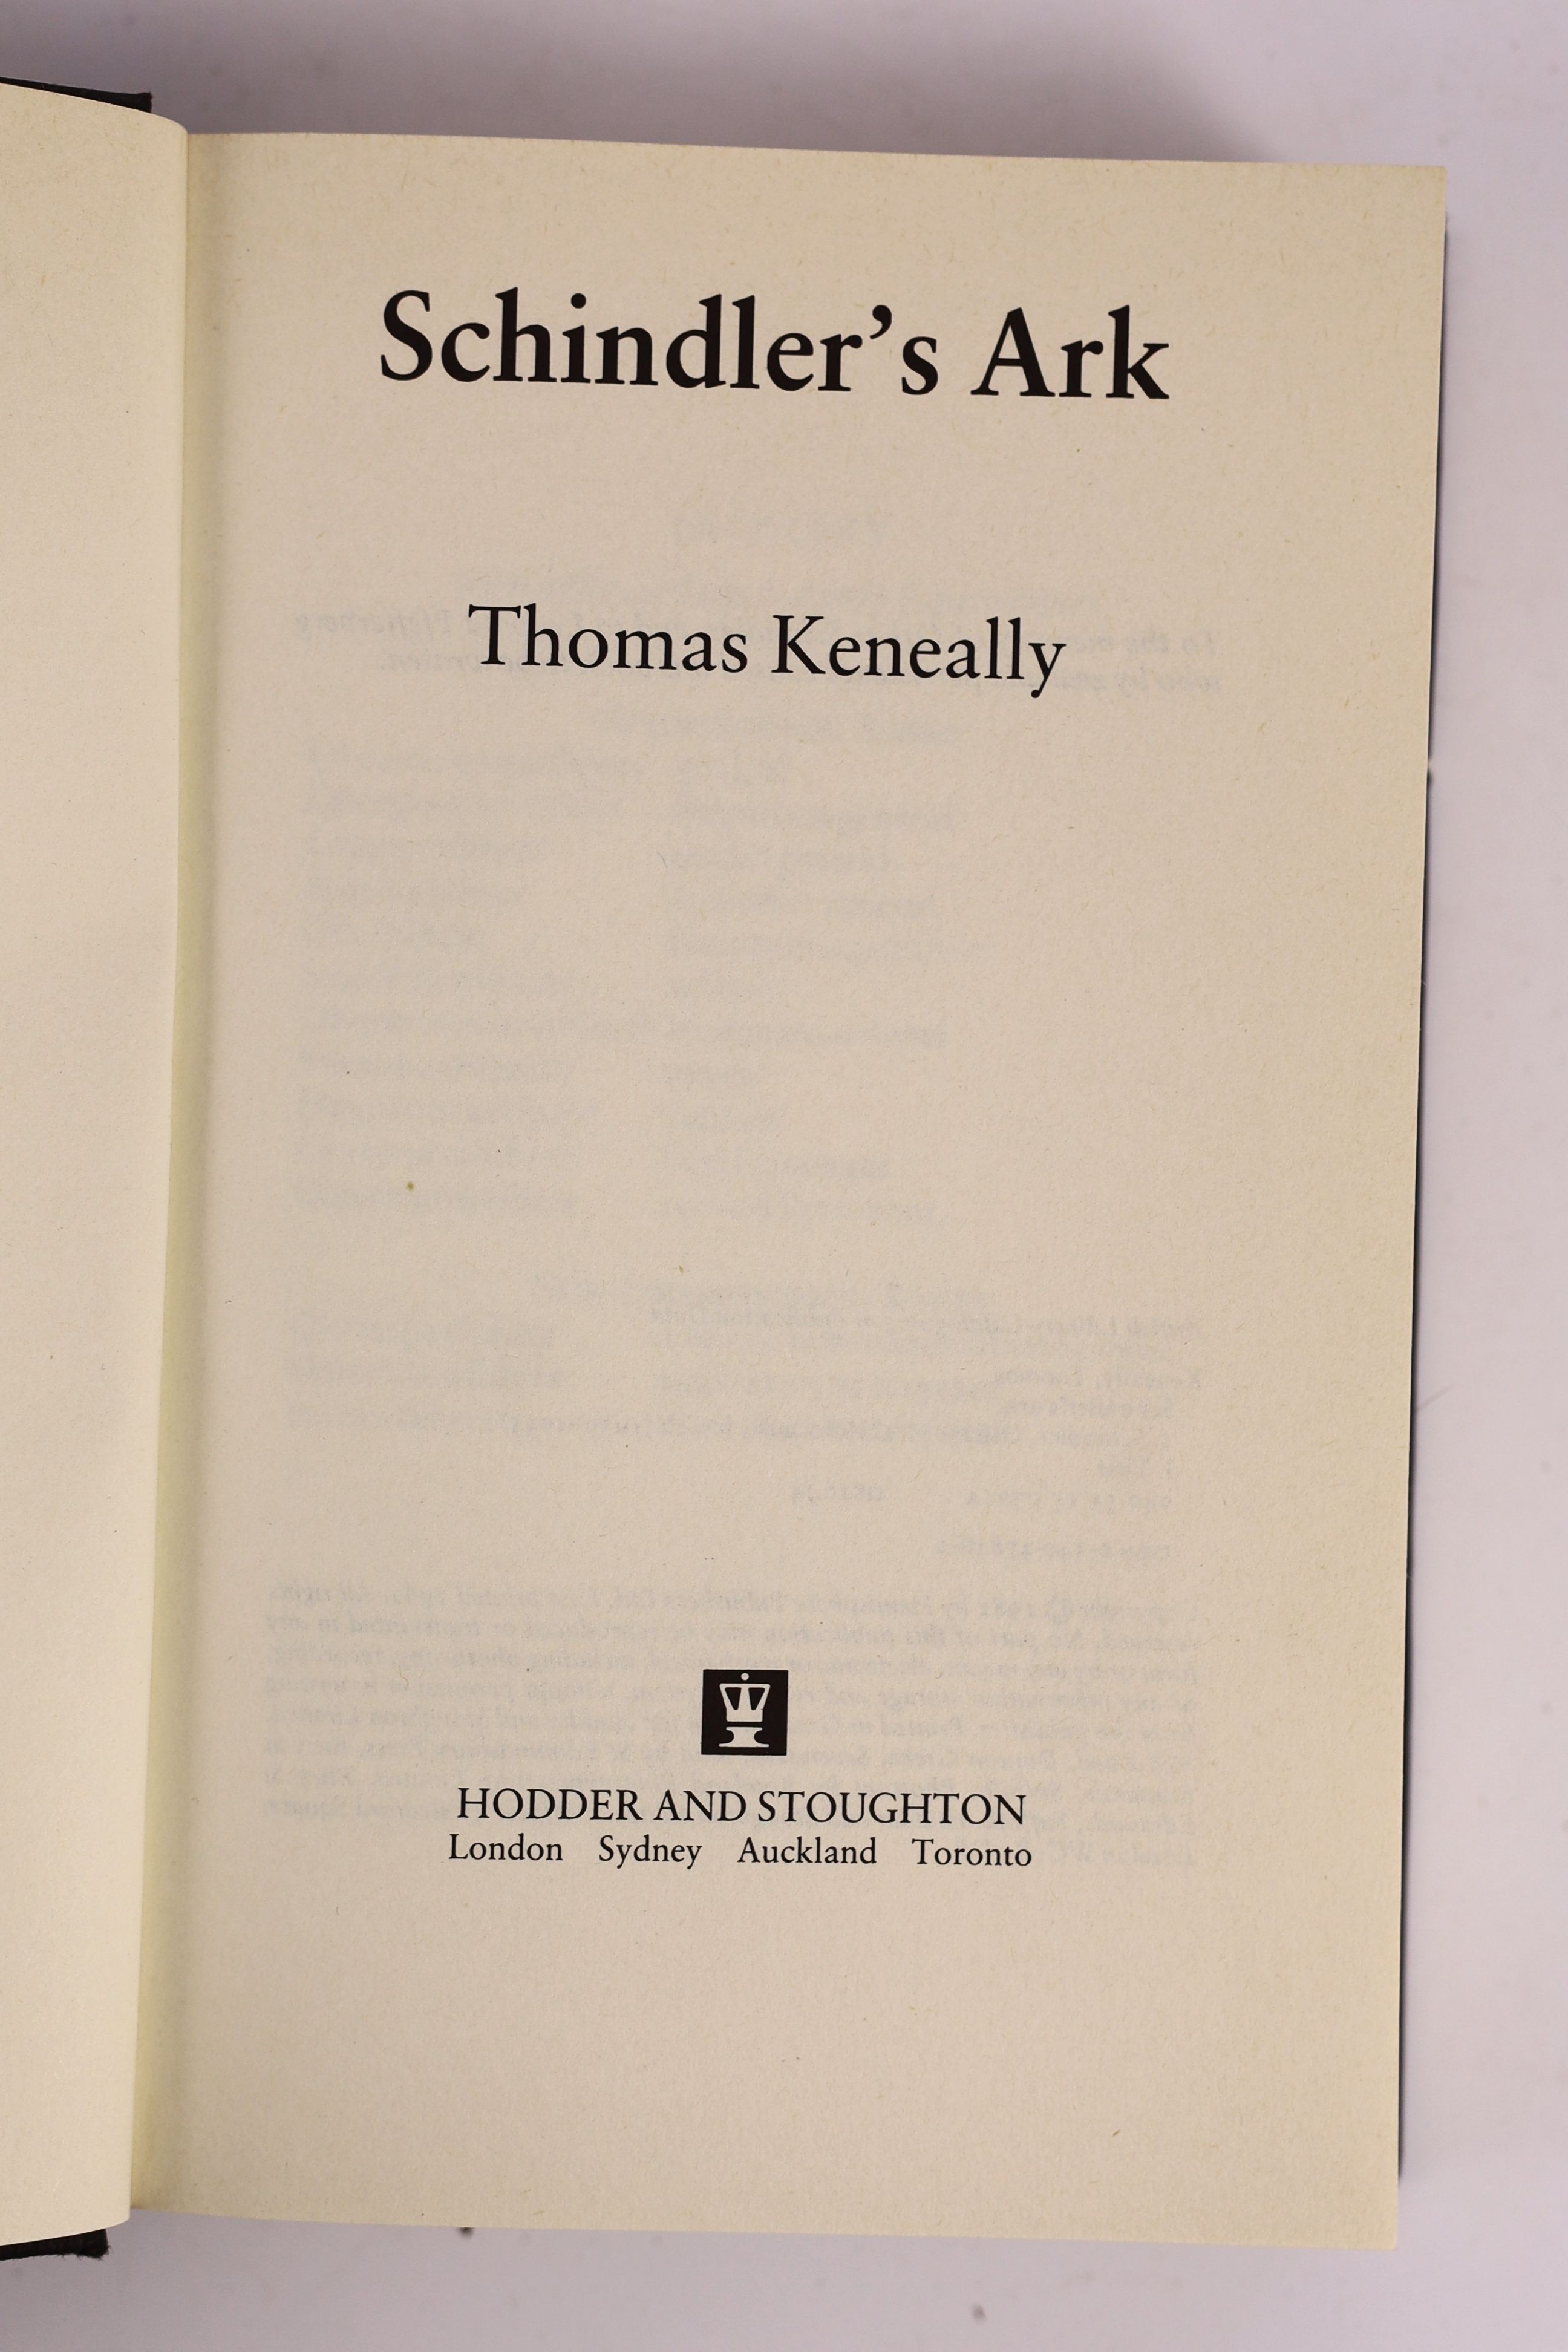 Keneally, Thomas- Schindler’s Ark, 1st edition, 2nd impression, 8vo, cloth, with unclipped d/j, inscribed - ‘’Darling Caroline, with love from Keneally, Christmas 1982 (N.B. Please don’t lose this one)’’, Hodder & Stough